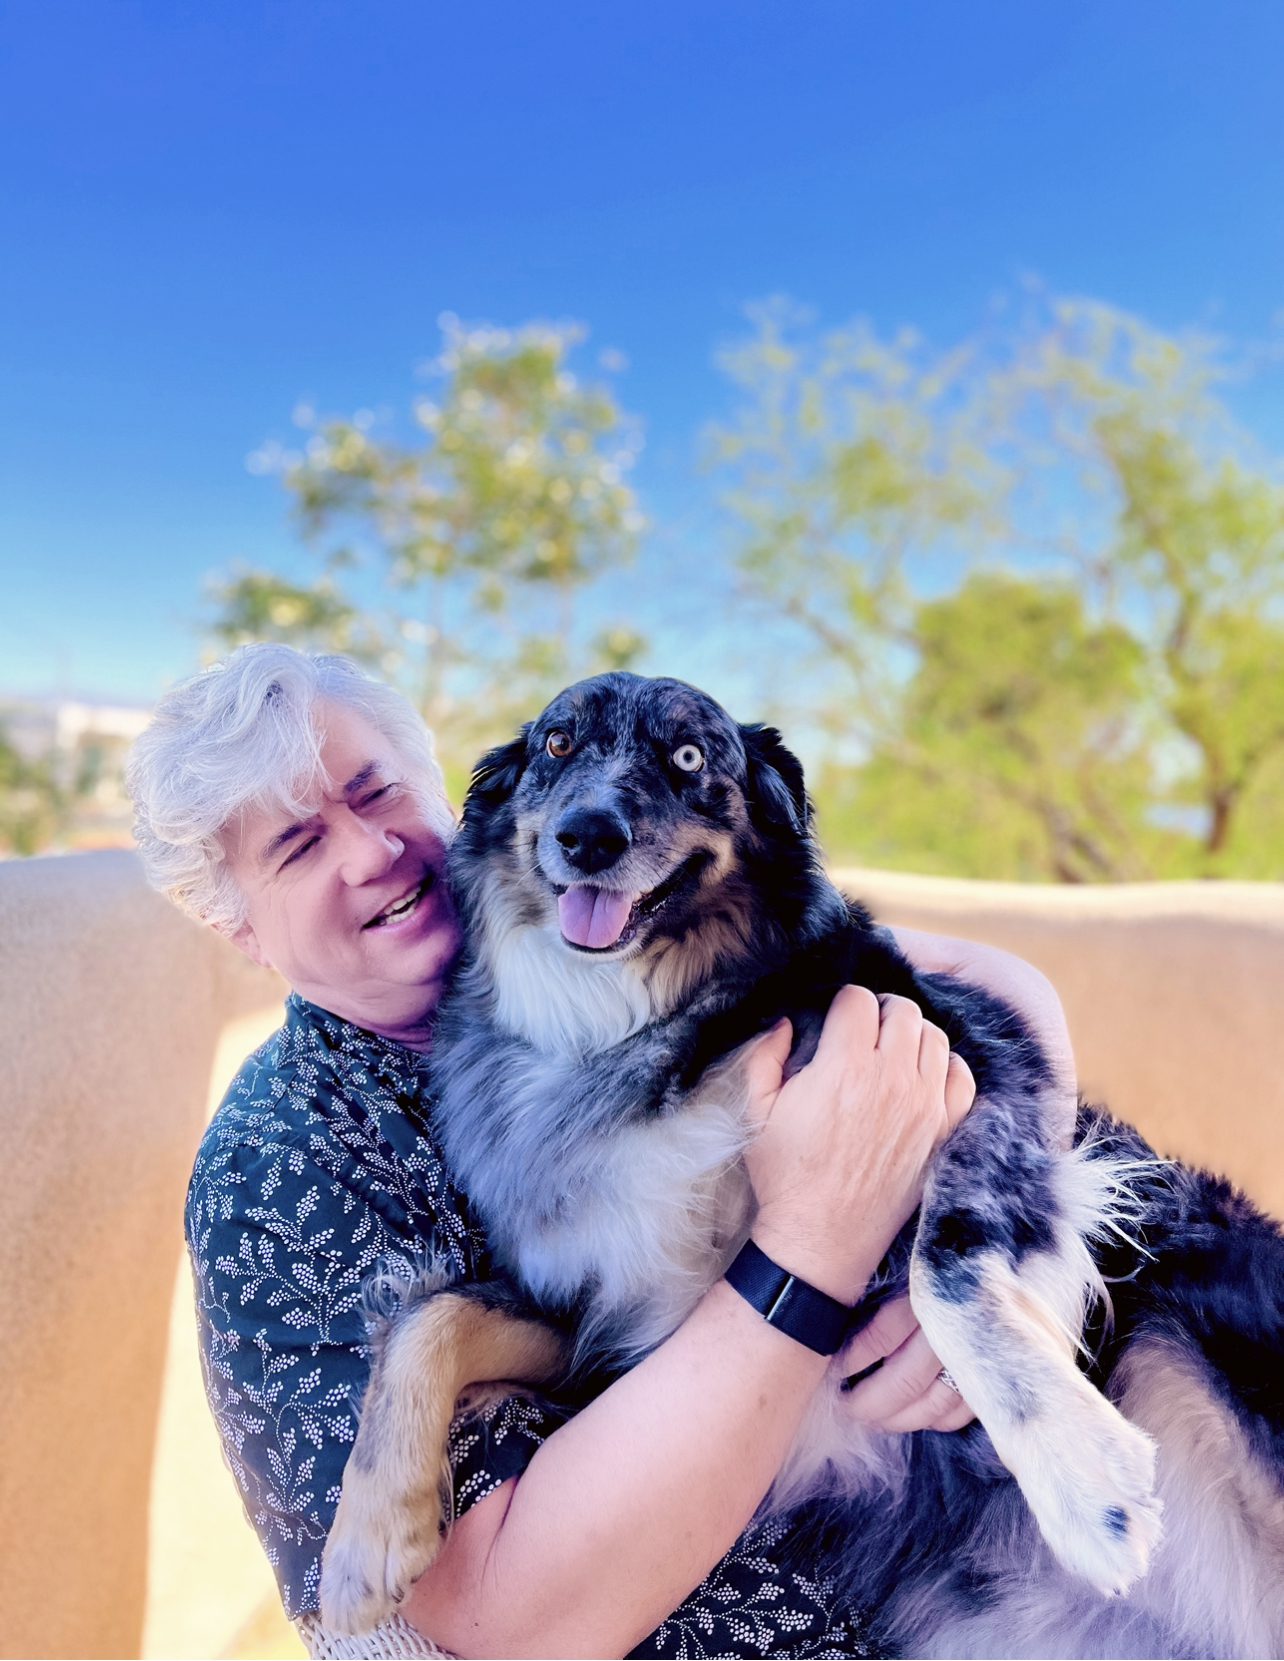 A person happily embracing a blue-eyed australian shepherd dog outdoors.